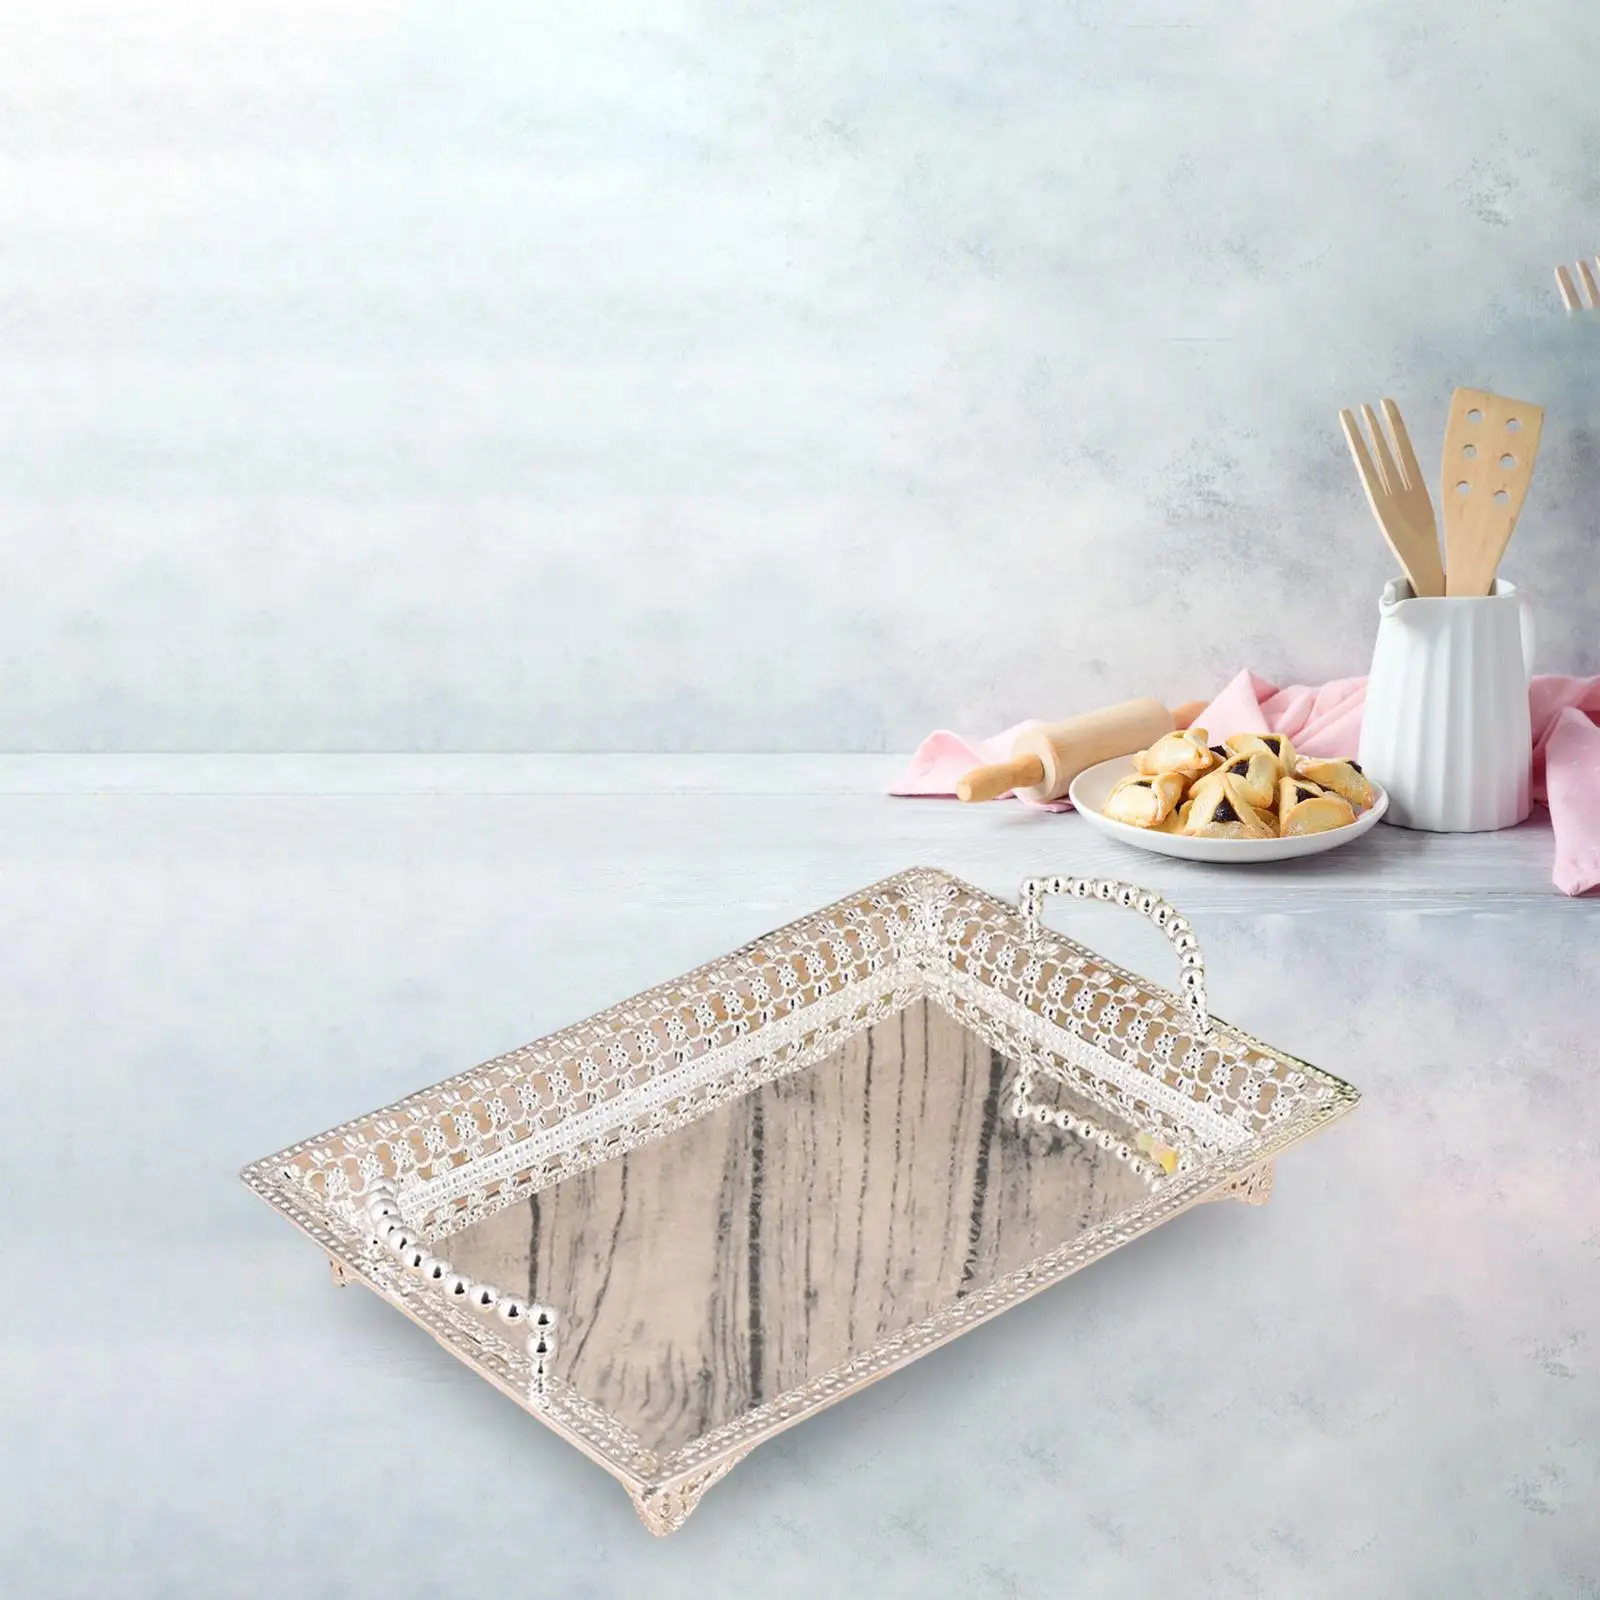 European Style Serving Tray Dinner Plate Dessert Cake Serving Tray for Wedding Table Decor Tea Party Countertop